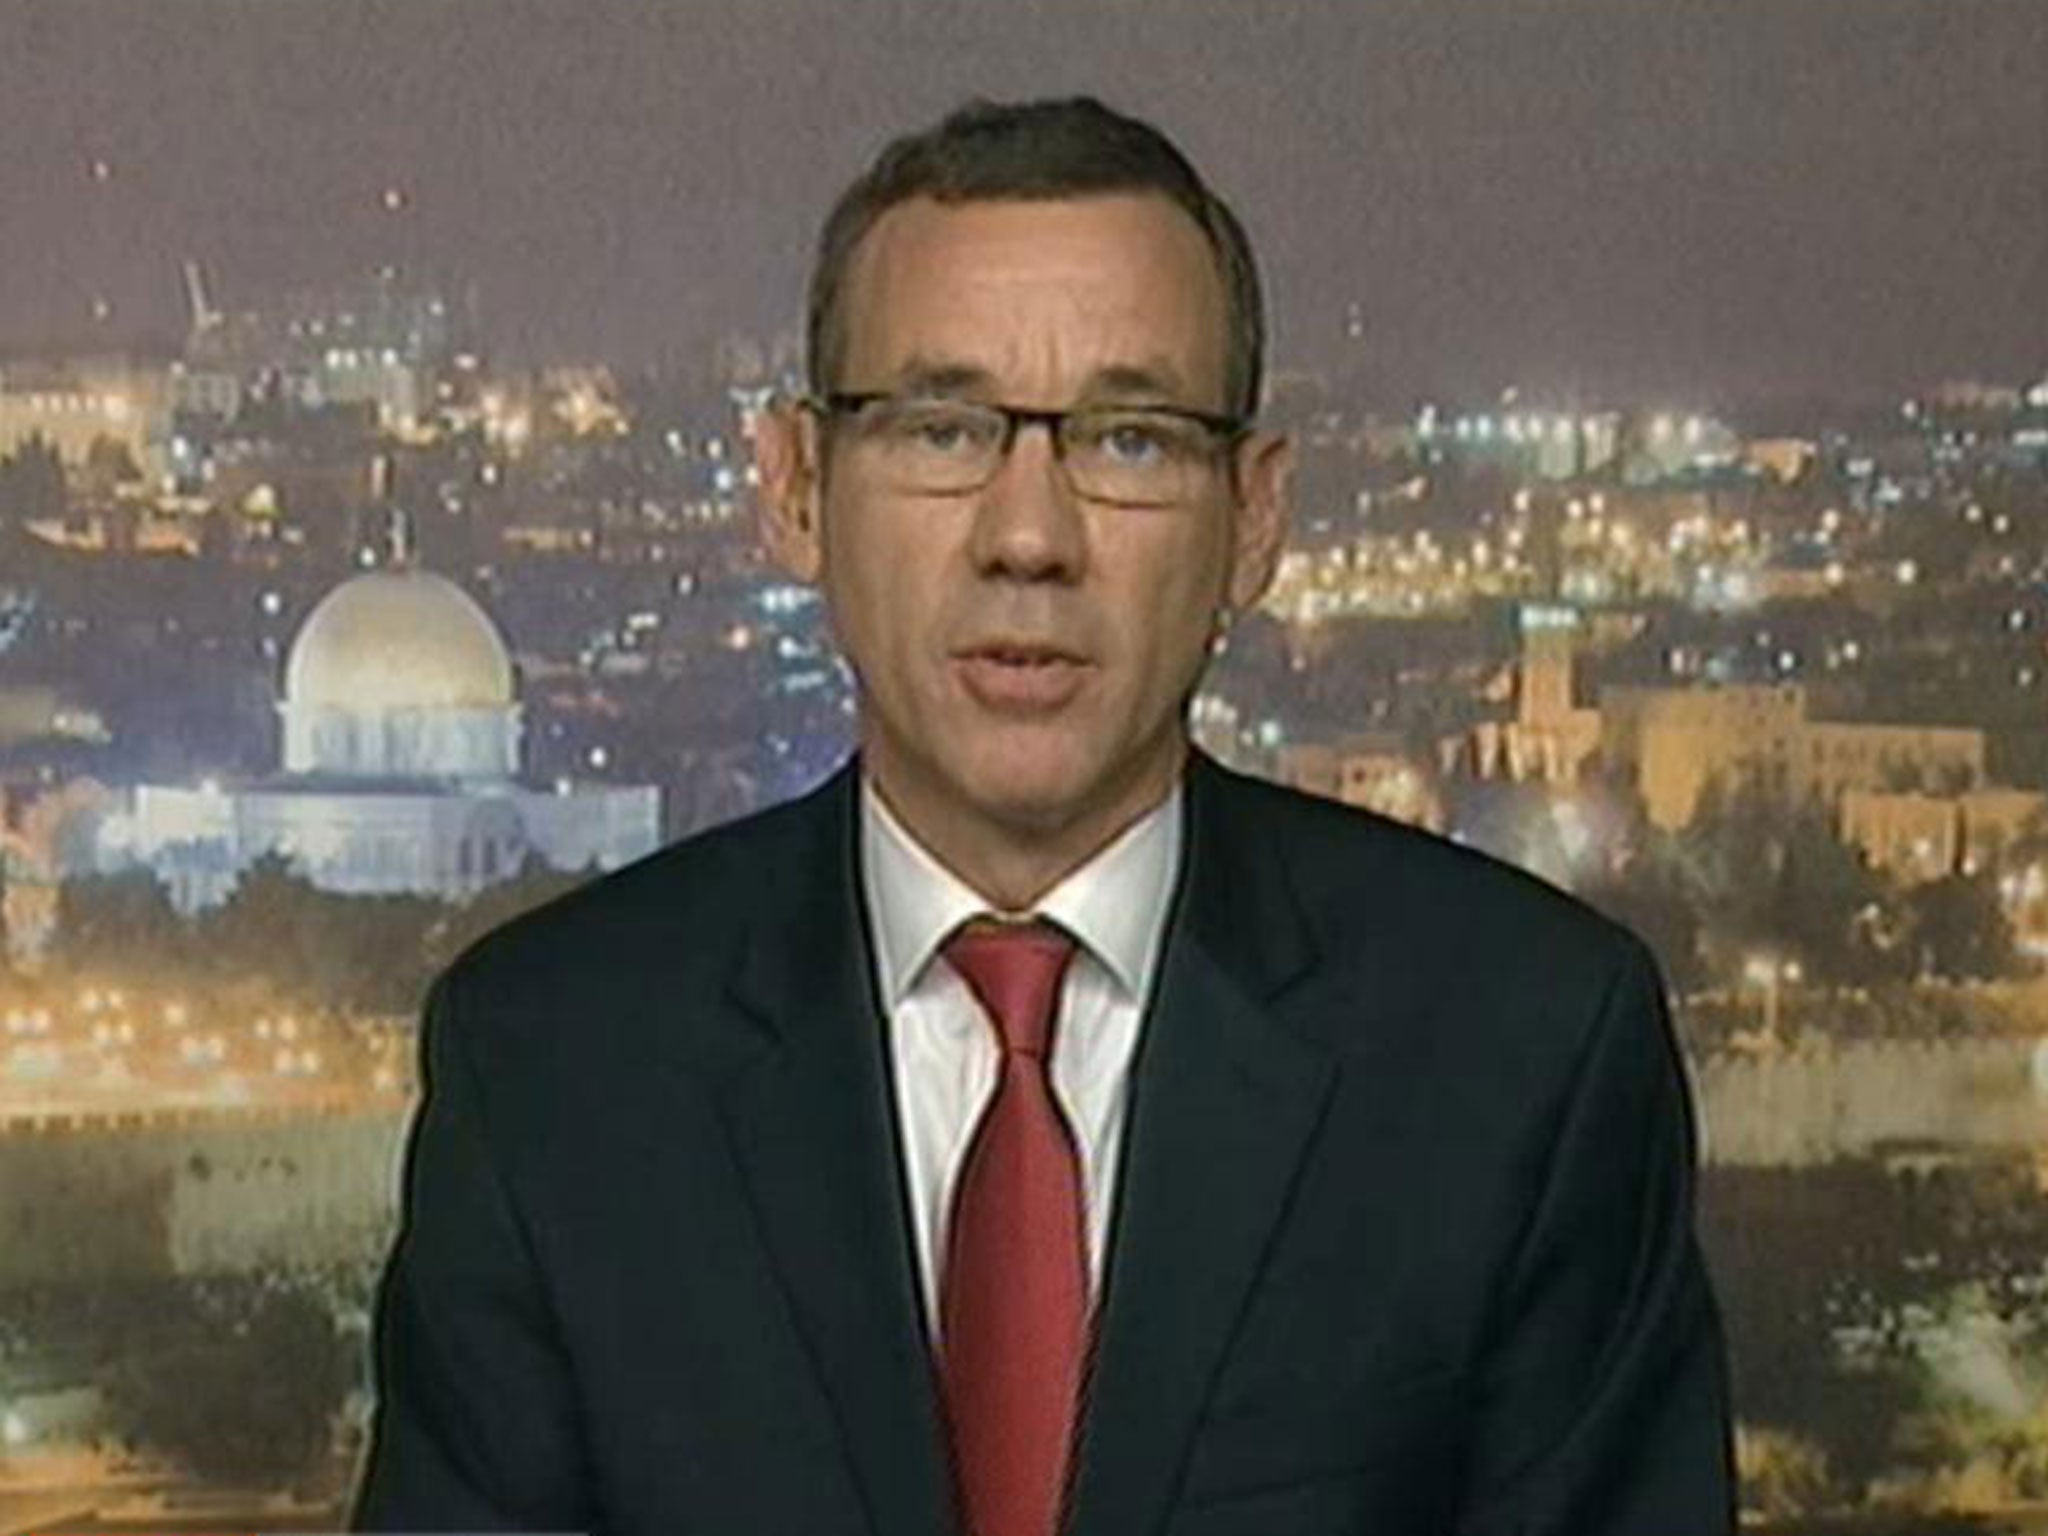 Mark Regev, a spokesperson for the Israeli government, appeared on Channel 4 News to discuss the conflict.